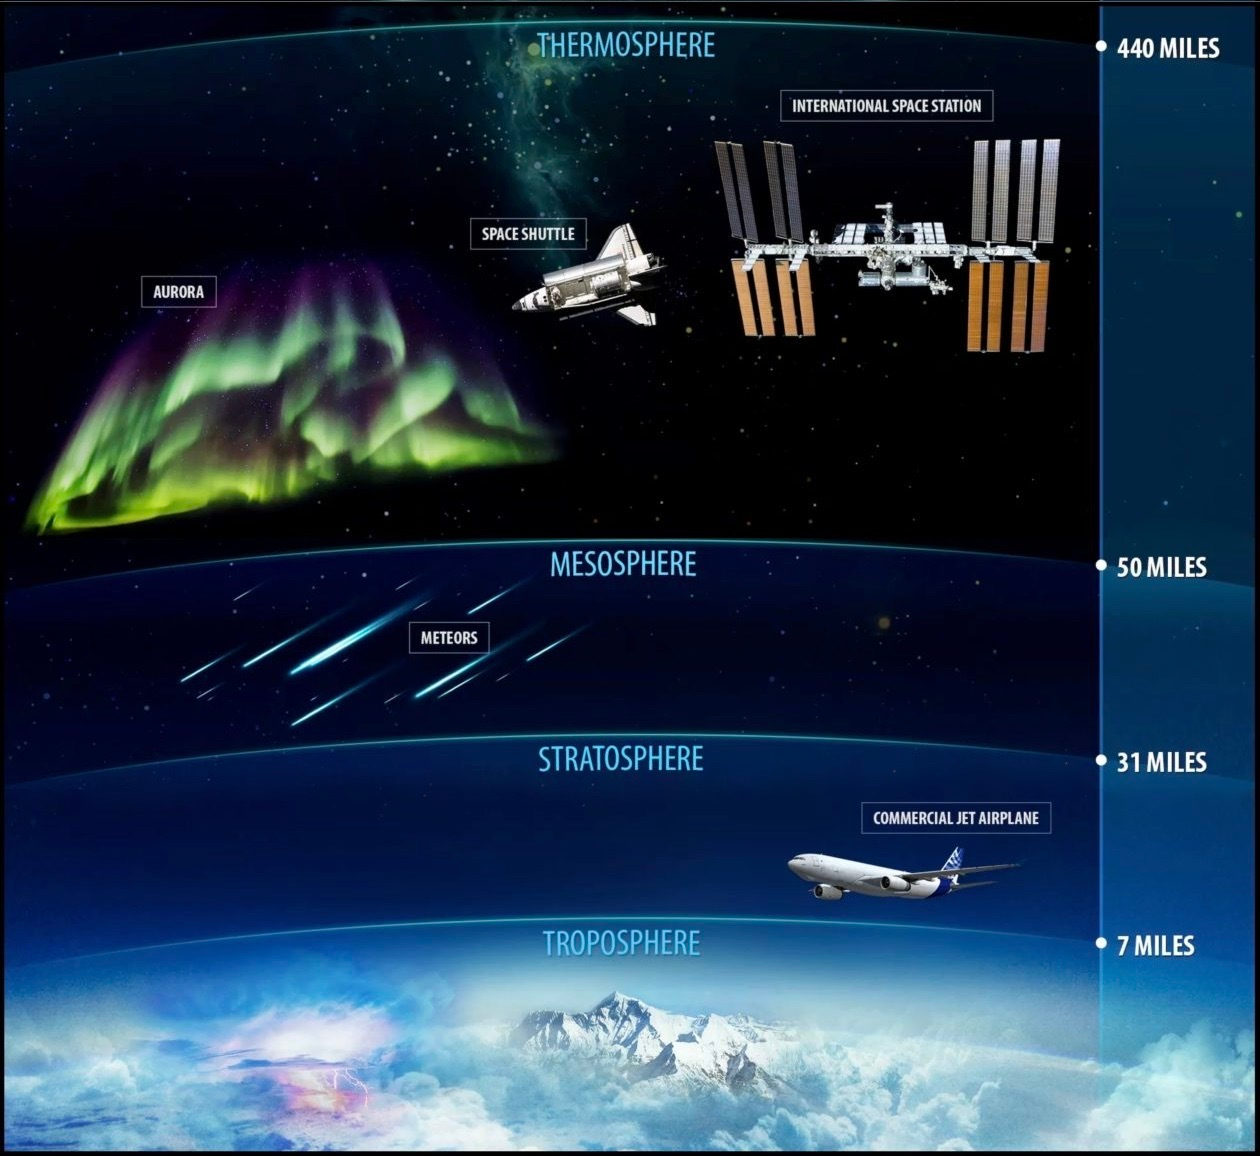 An illustration shows the layers of the atmosphere from earth into space, with an airplane and satellite.